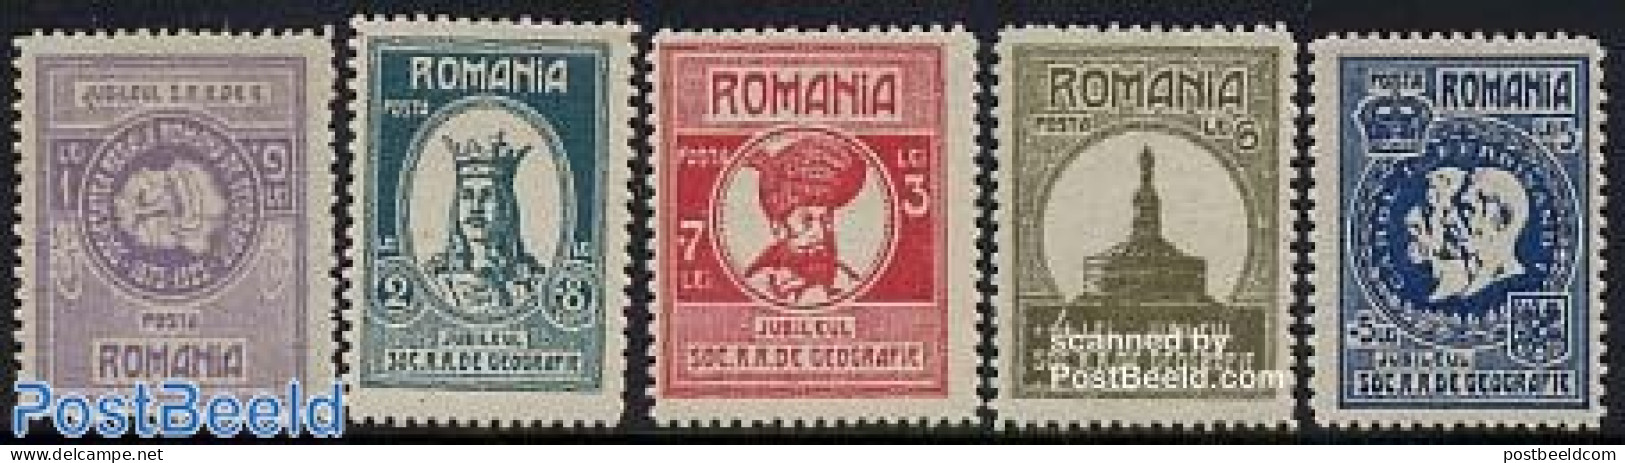 Romania 1927 Geographic Society 5v, Unused (hinged), History - Various - Kings & Queens (Royalty) - Maps - Unused Stamps